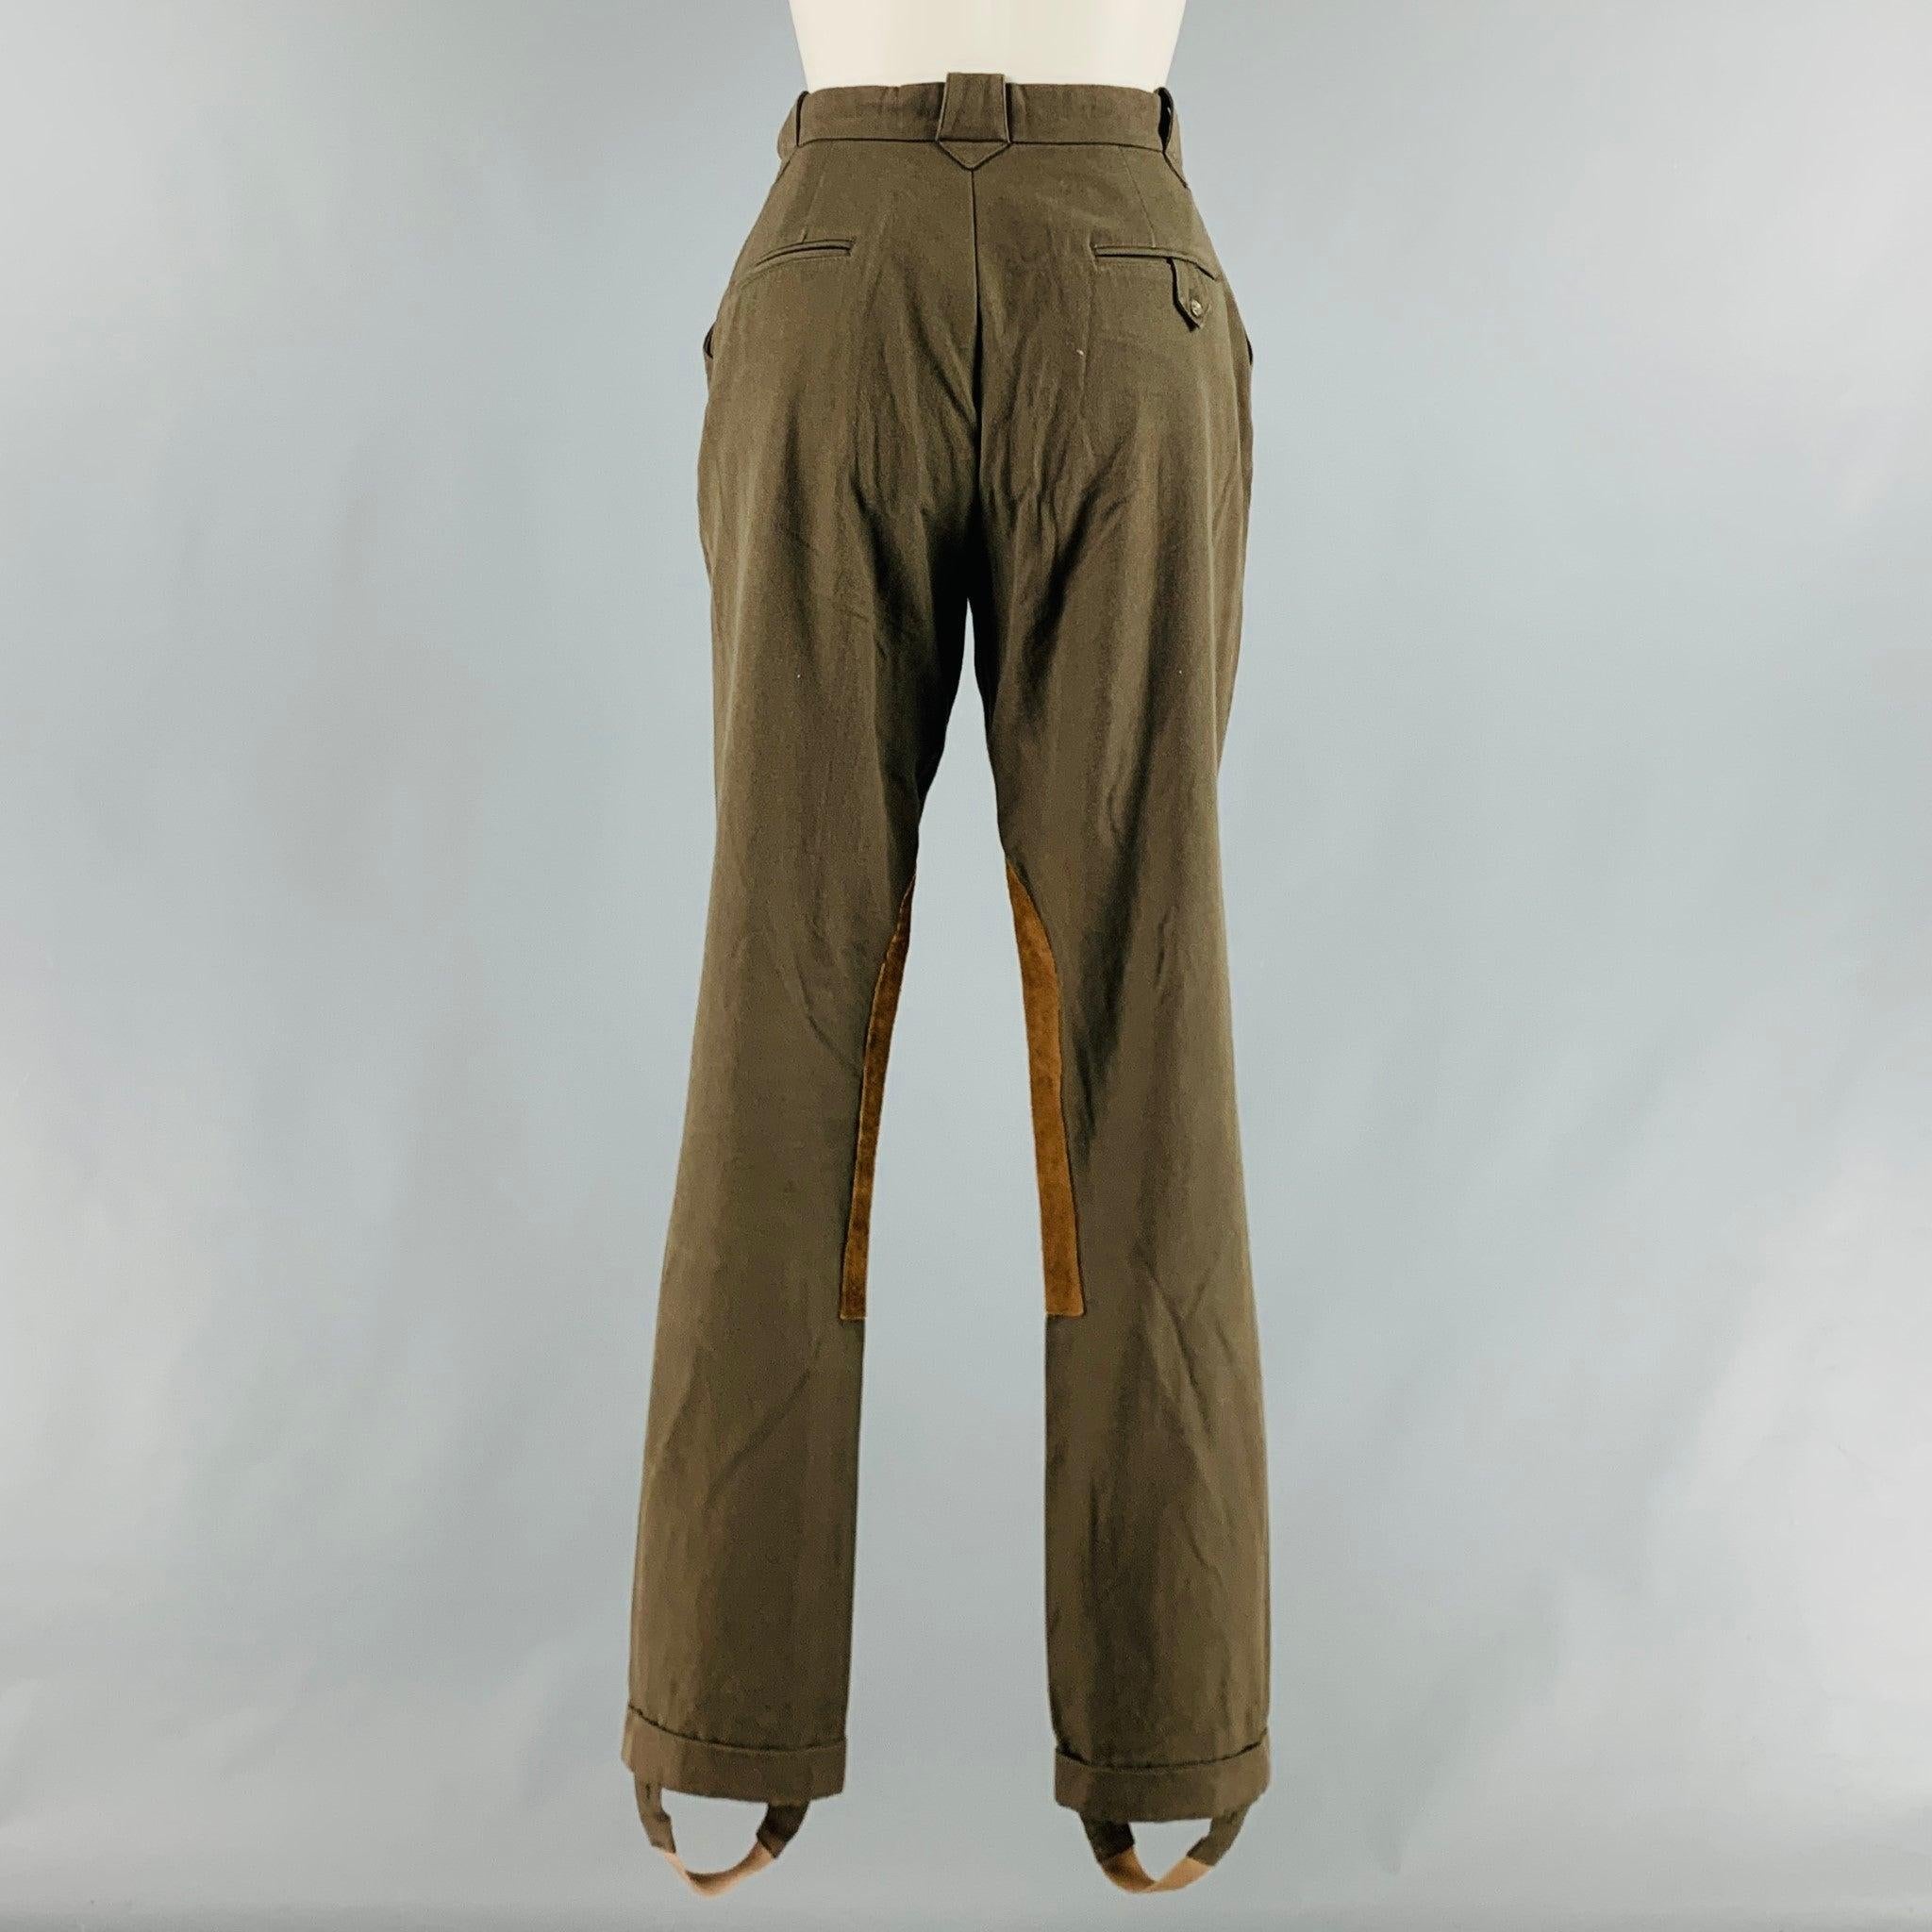 RALPH LAUREN Size 10 Green Olive Cotton Patchwork Suede Jodhpurs Casual Pants In Excellent Condition For Sale In San Francisco, CA